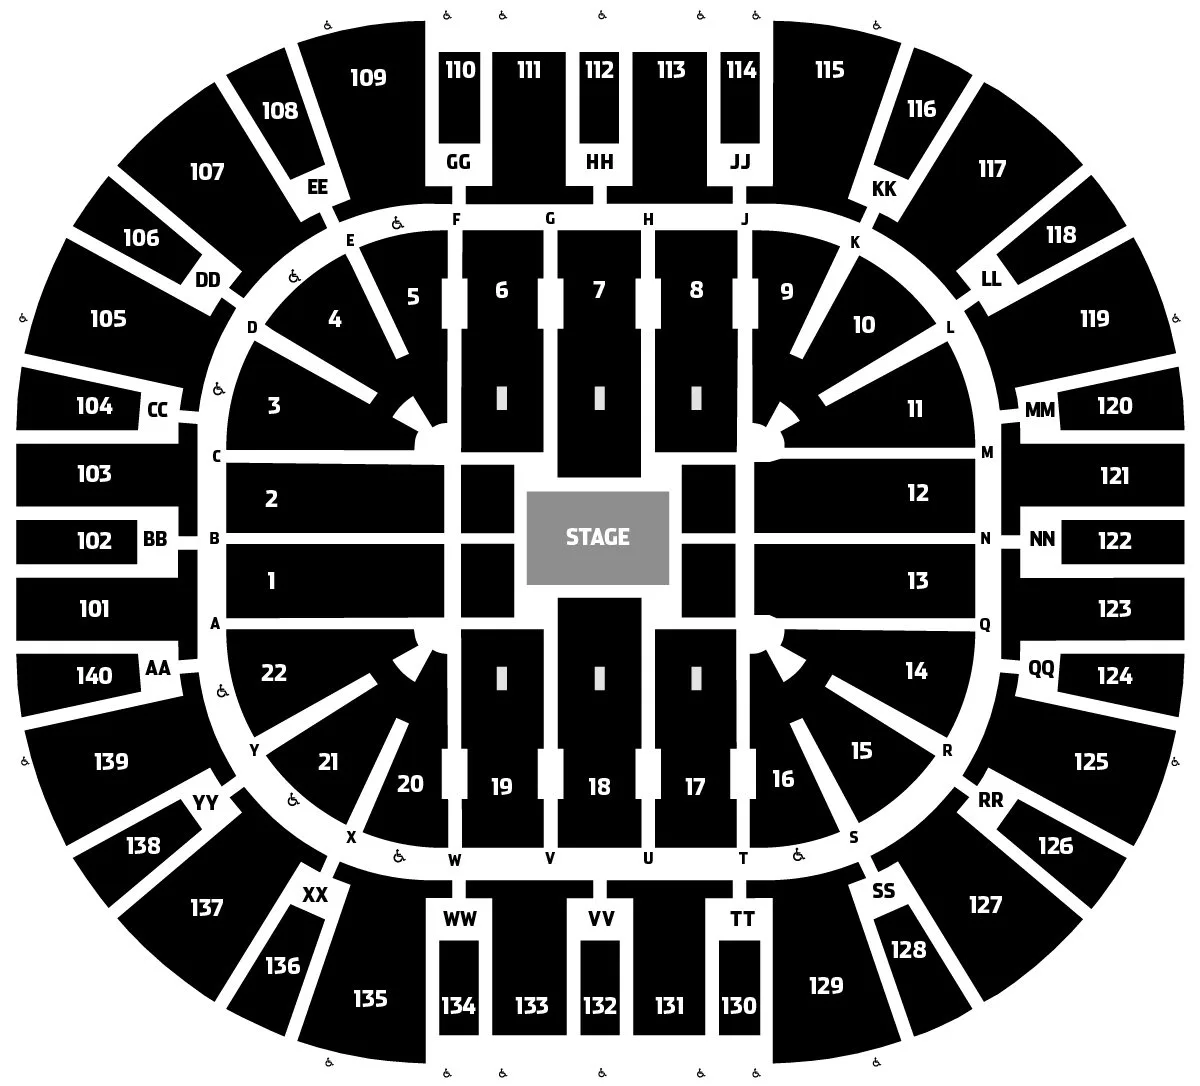 Black and white photo of seating map for a concert in the round